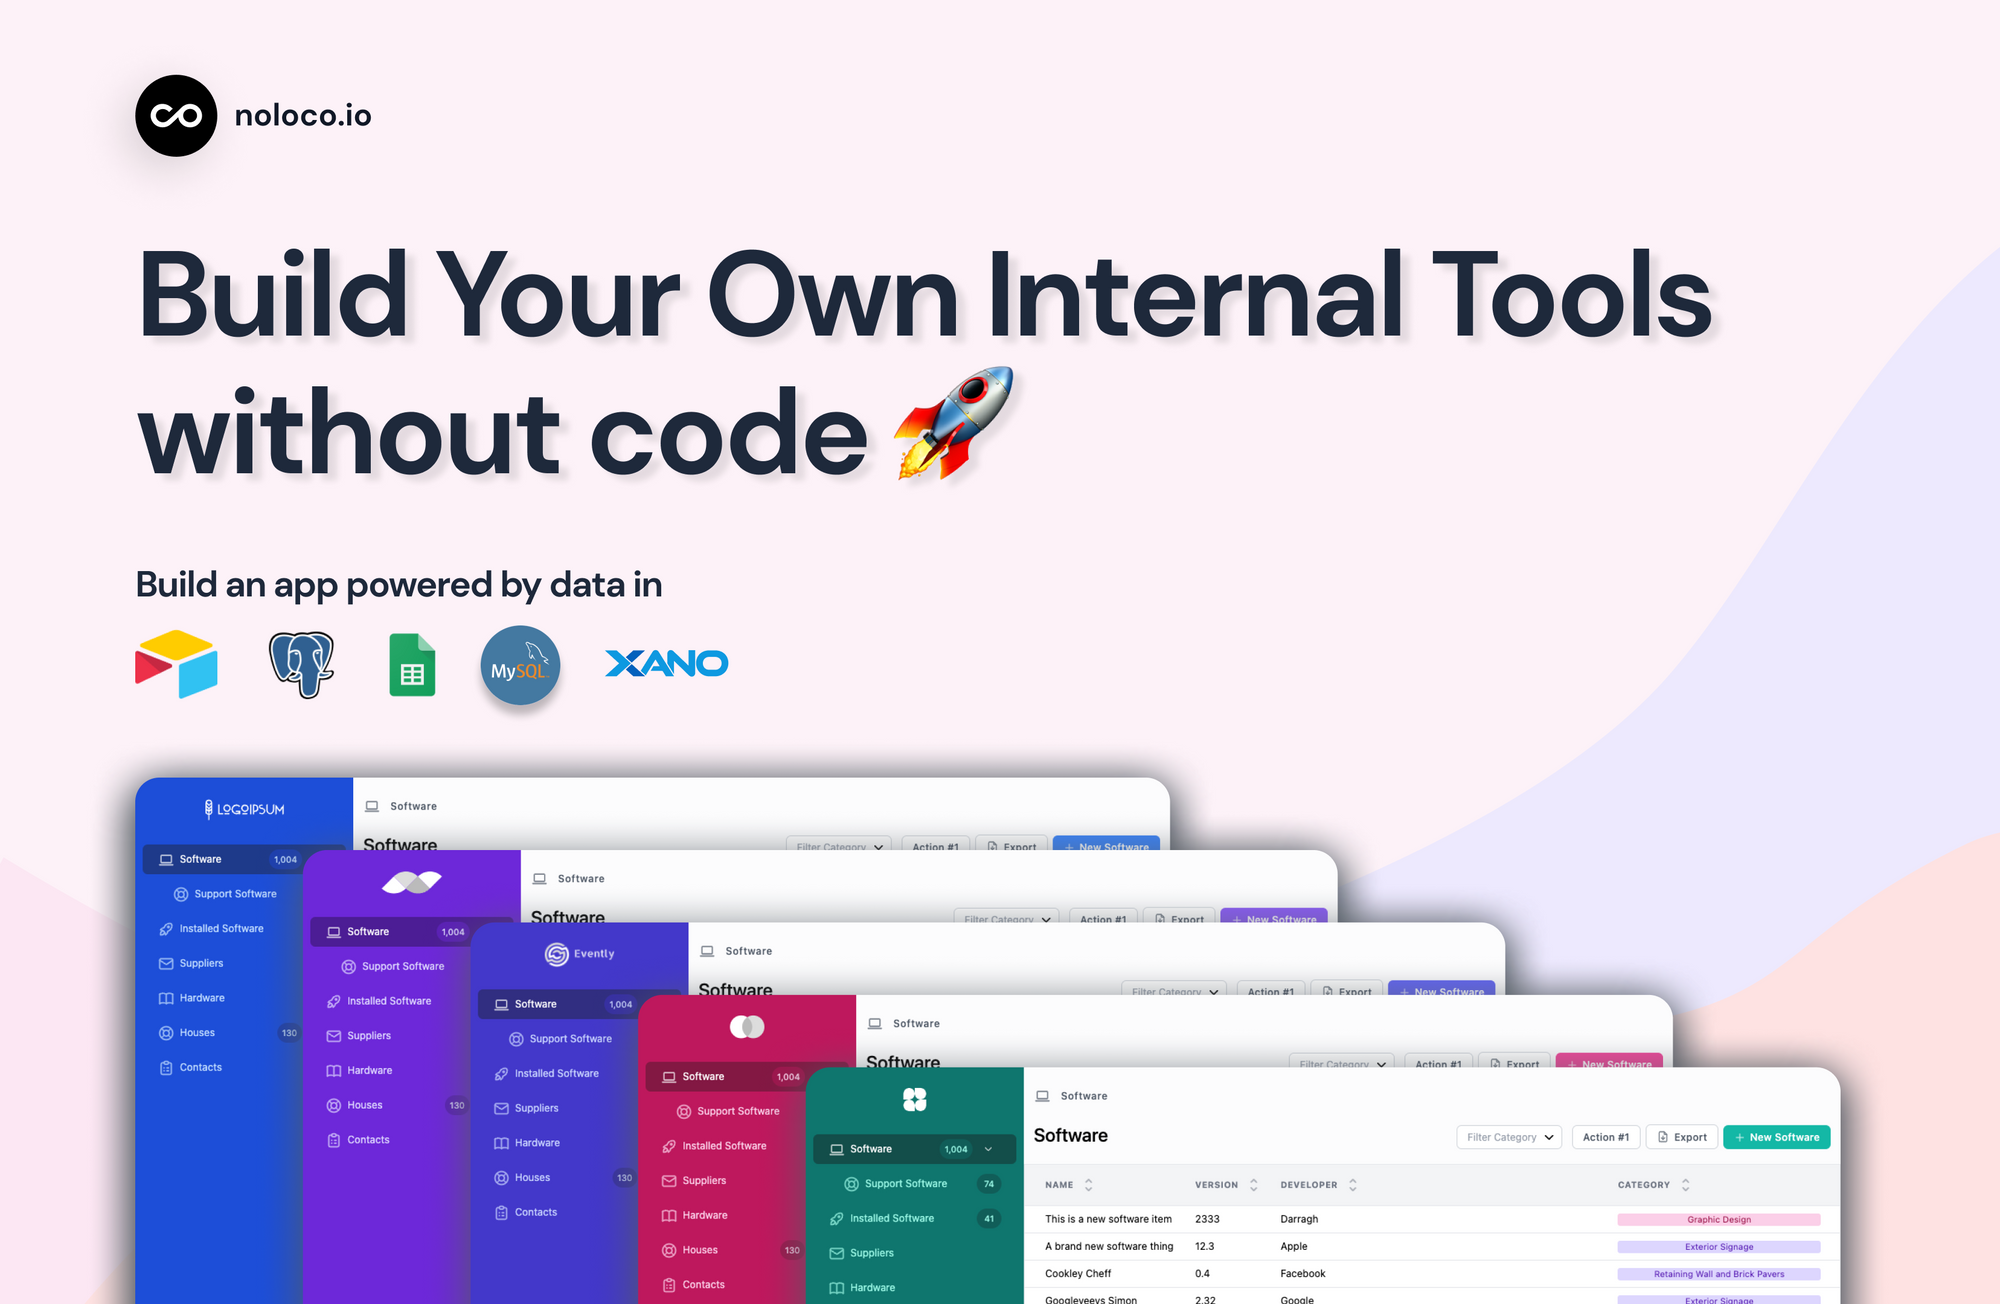 Noloco - Build internal tools for your team without code